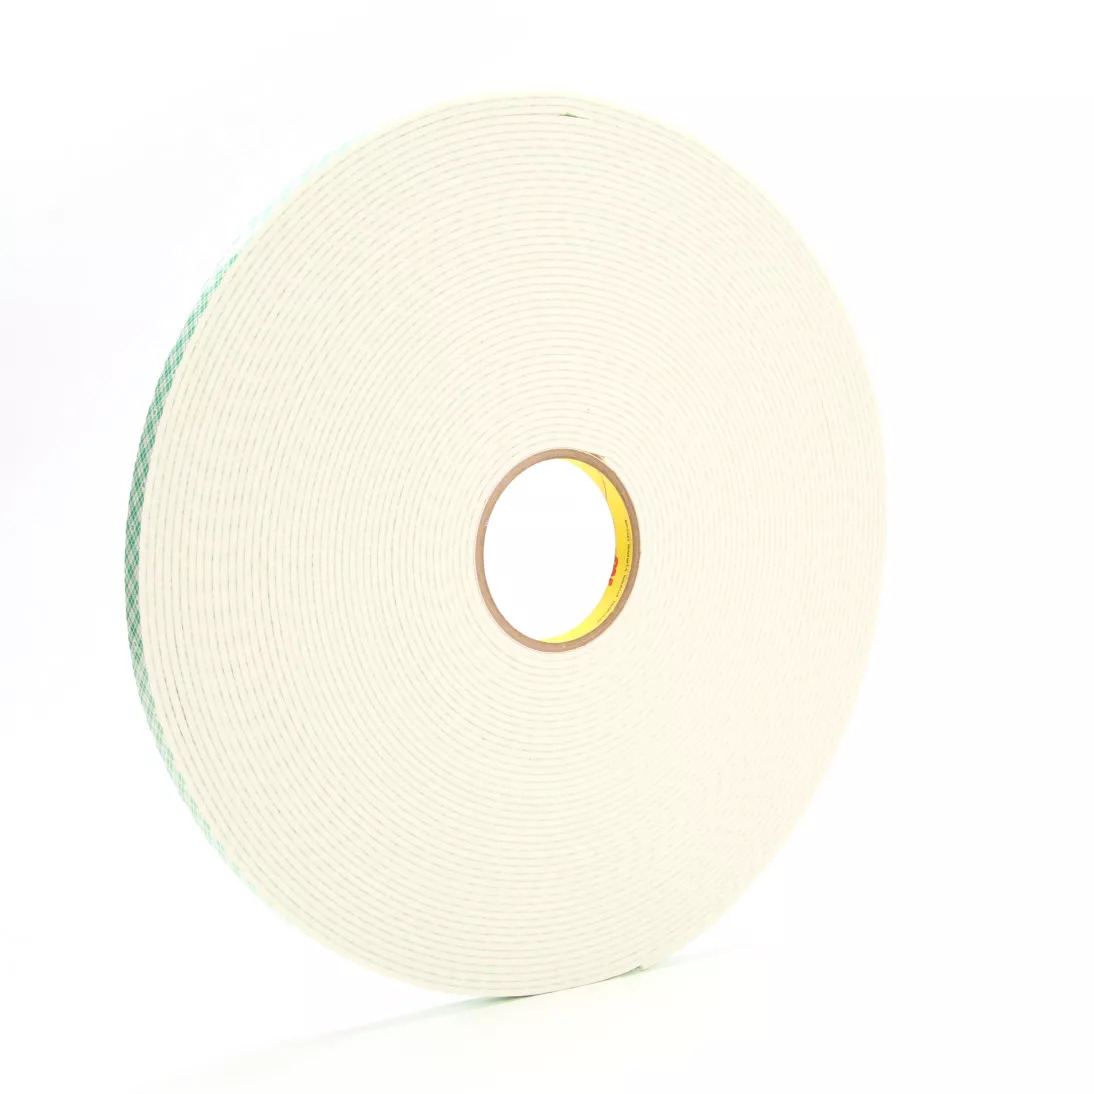 3M™ Double Coated Urethane Foam Tape 4008, Off White, 1/2 in x 36 yd,
125 mil, 18 rolls per case